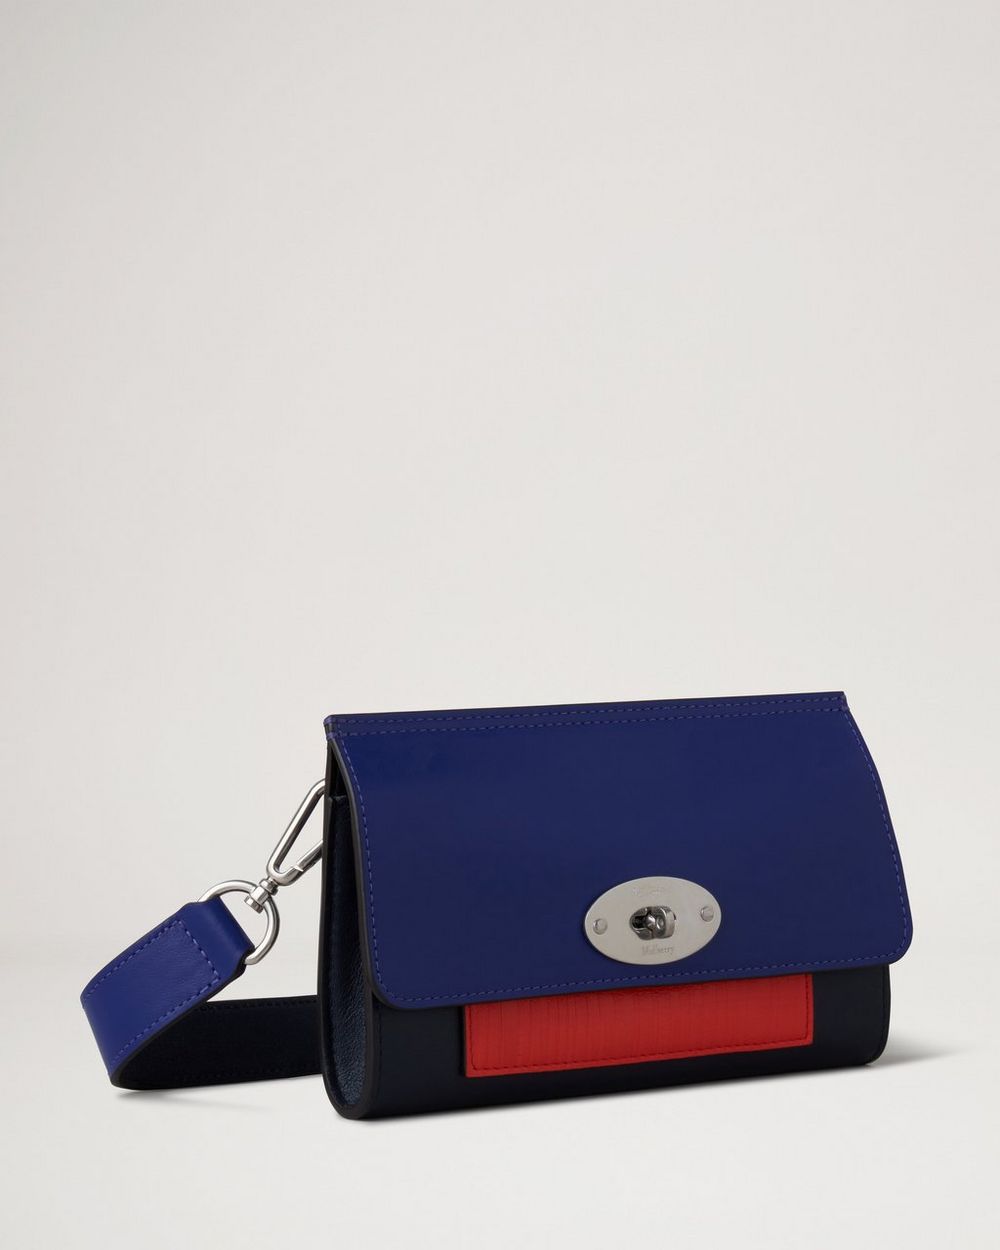 Mulberry & Paul Smith Team Up On New Capsule - Style